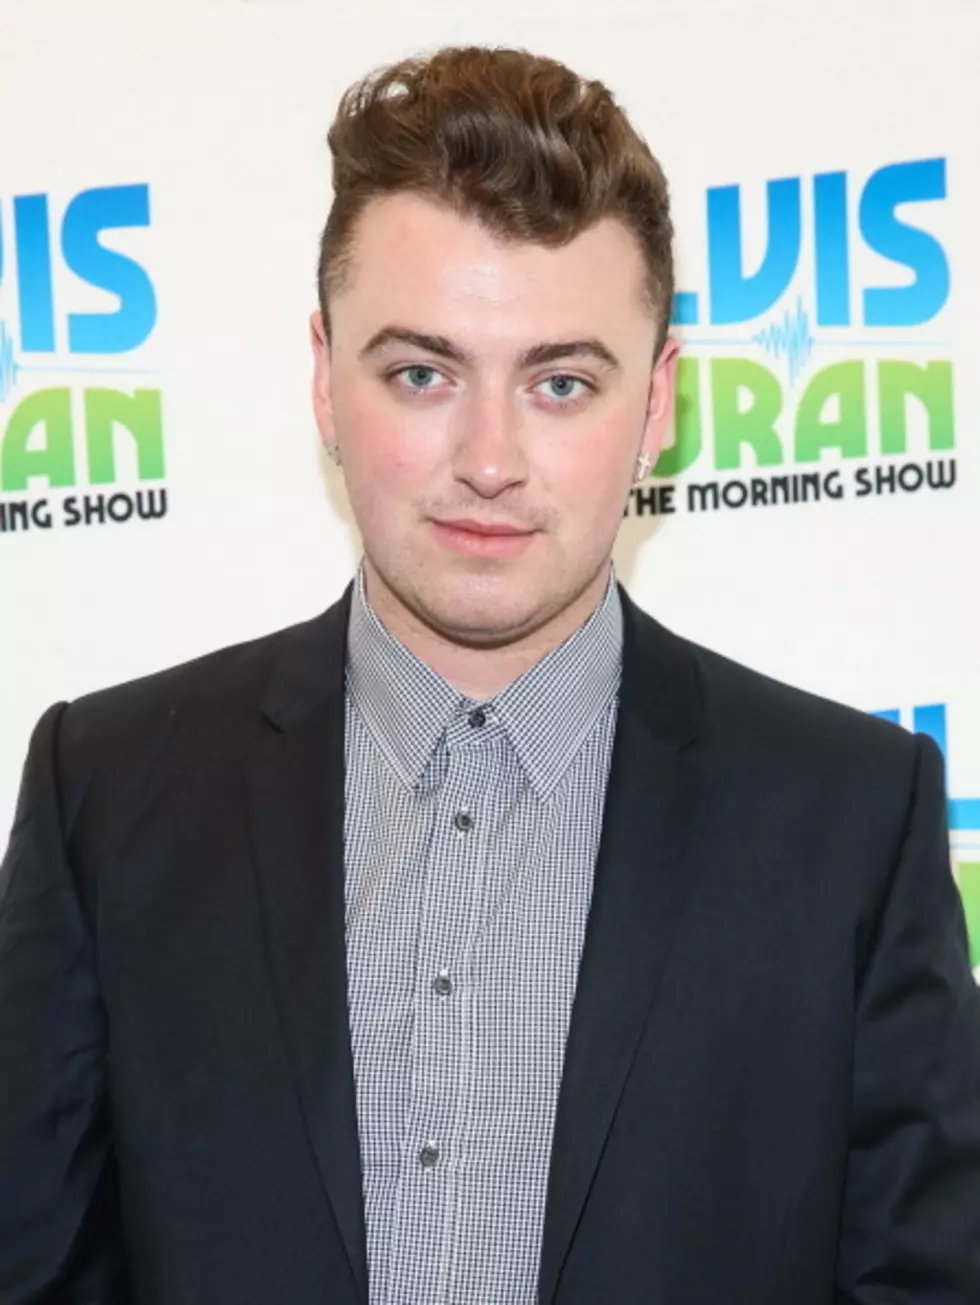 Who Is Sam Smith? Cuz He Can Sing [Video]